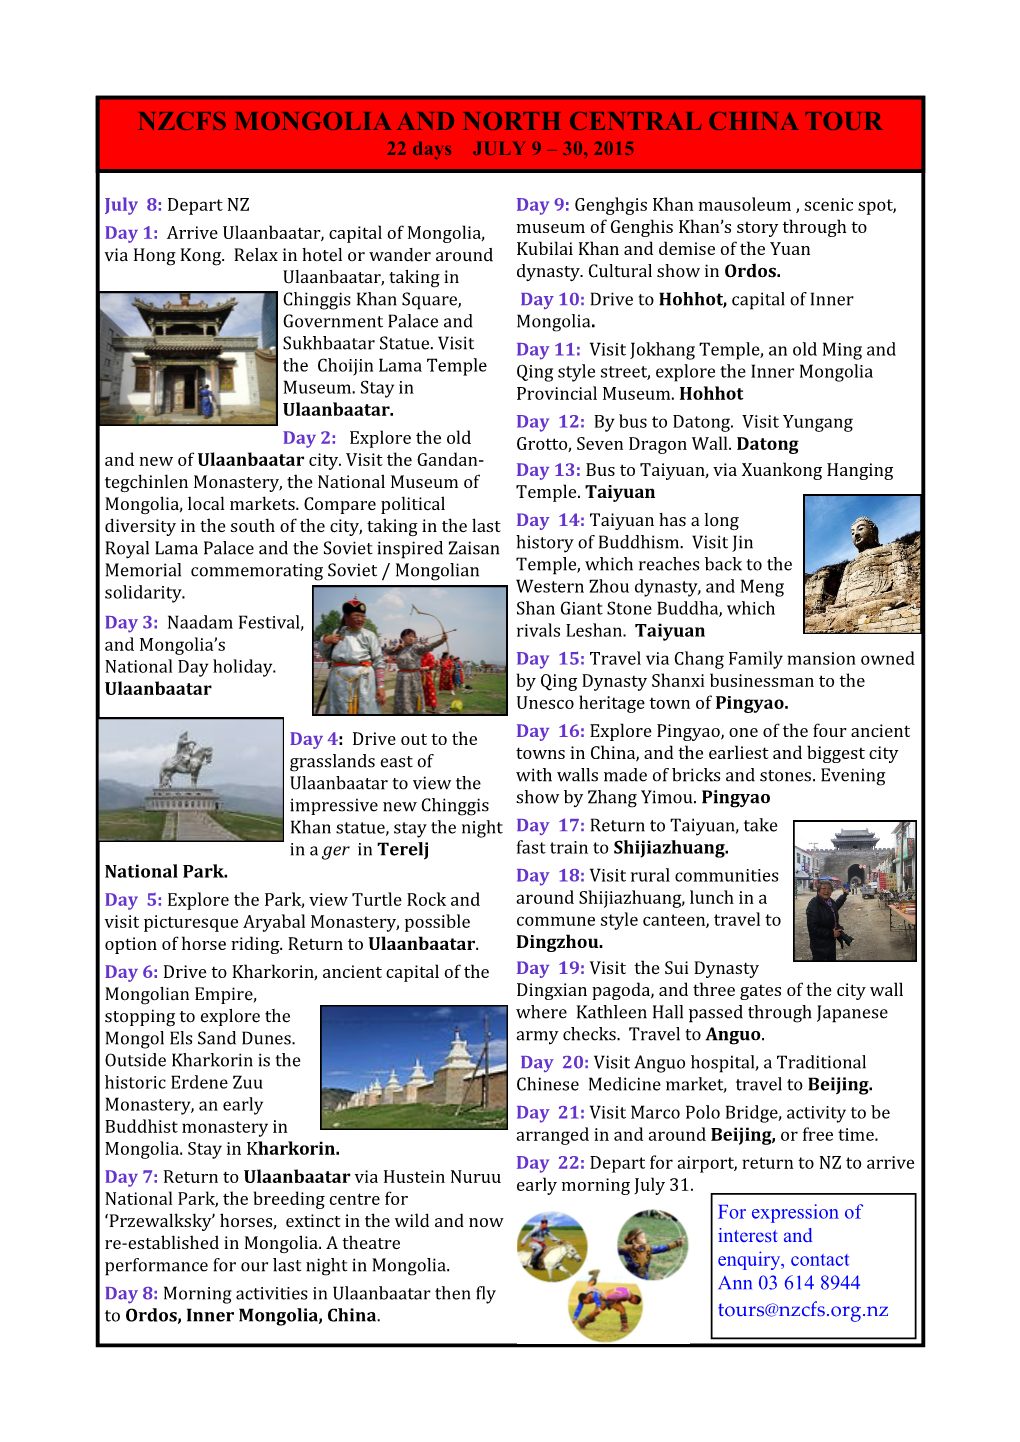 NZCFS MONGOLIA and NORTH CENTRAL CHINA TOUR 22 Days JULY 9 – 30, 2015